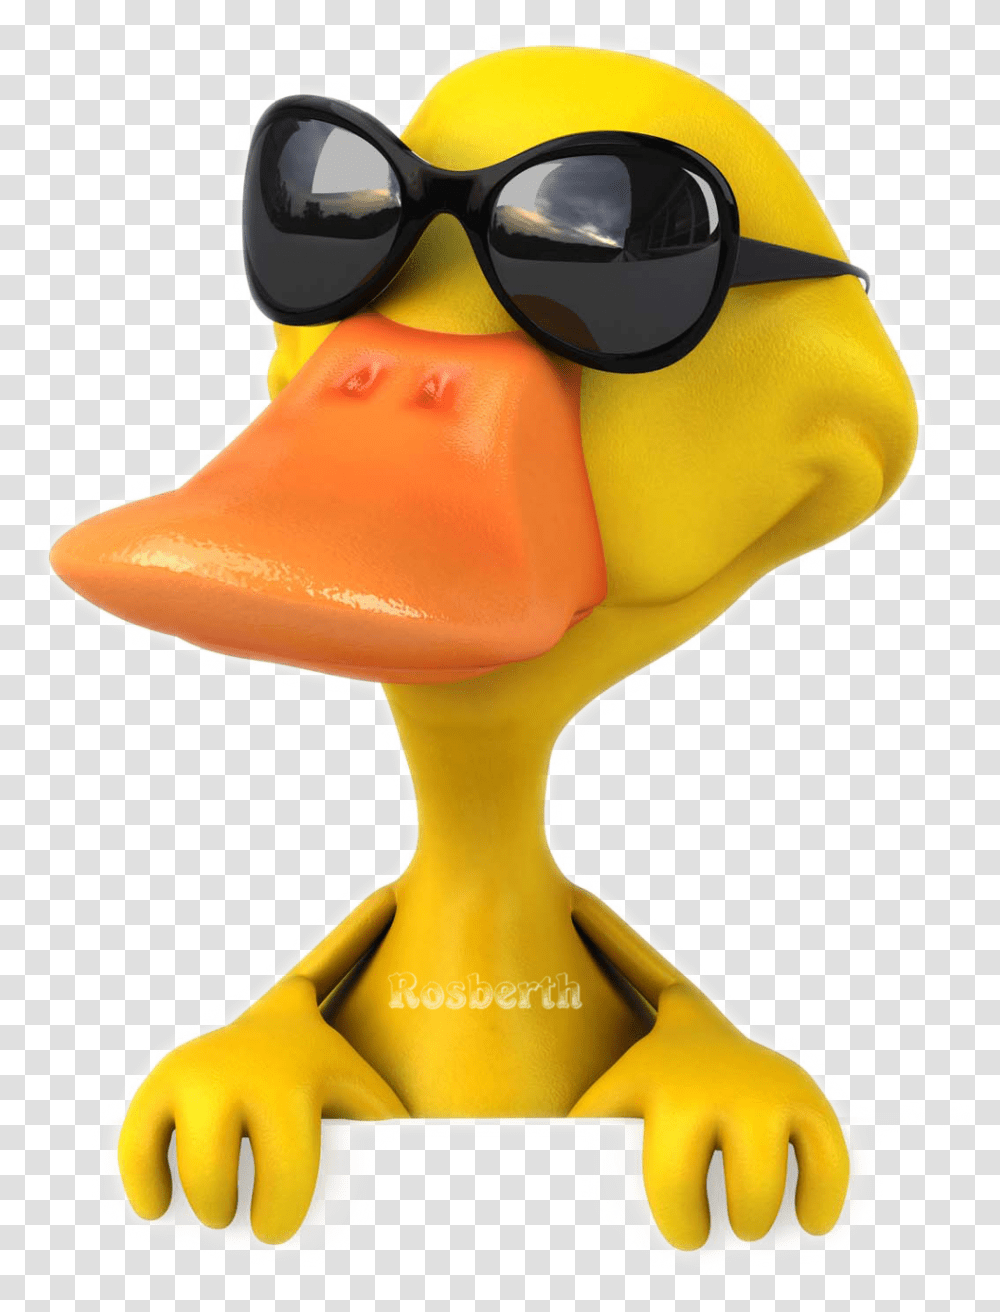 Duck Animated Sunglasses Vector Nobackground Rosber Cartoon Ducks With Glasses, Accessories, Accessory, Bird, Animal Transparent Png